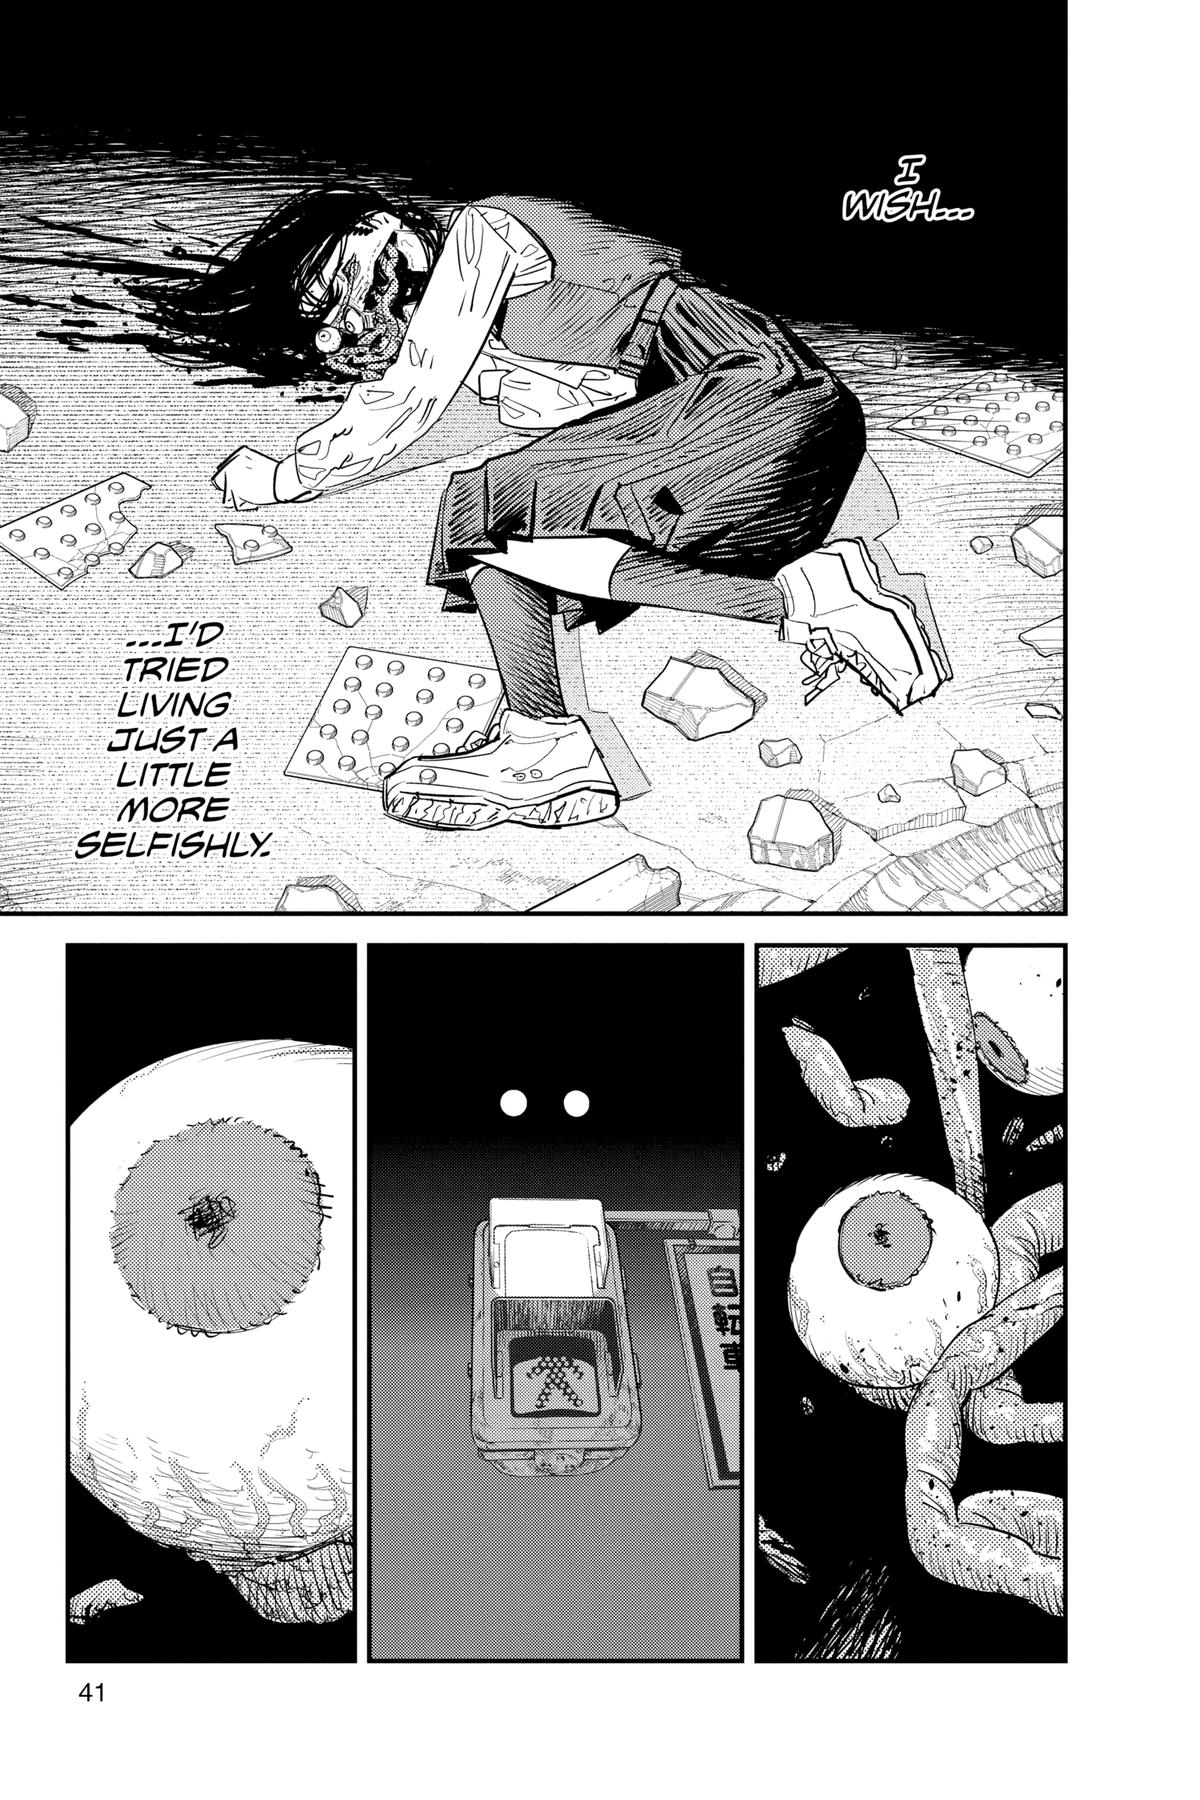 Chainsaw Man Part 2 chapter 98 now available: how to read it free -  Meristation